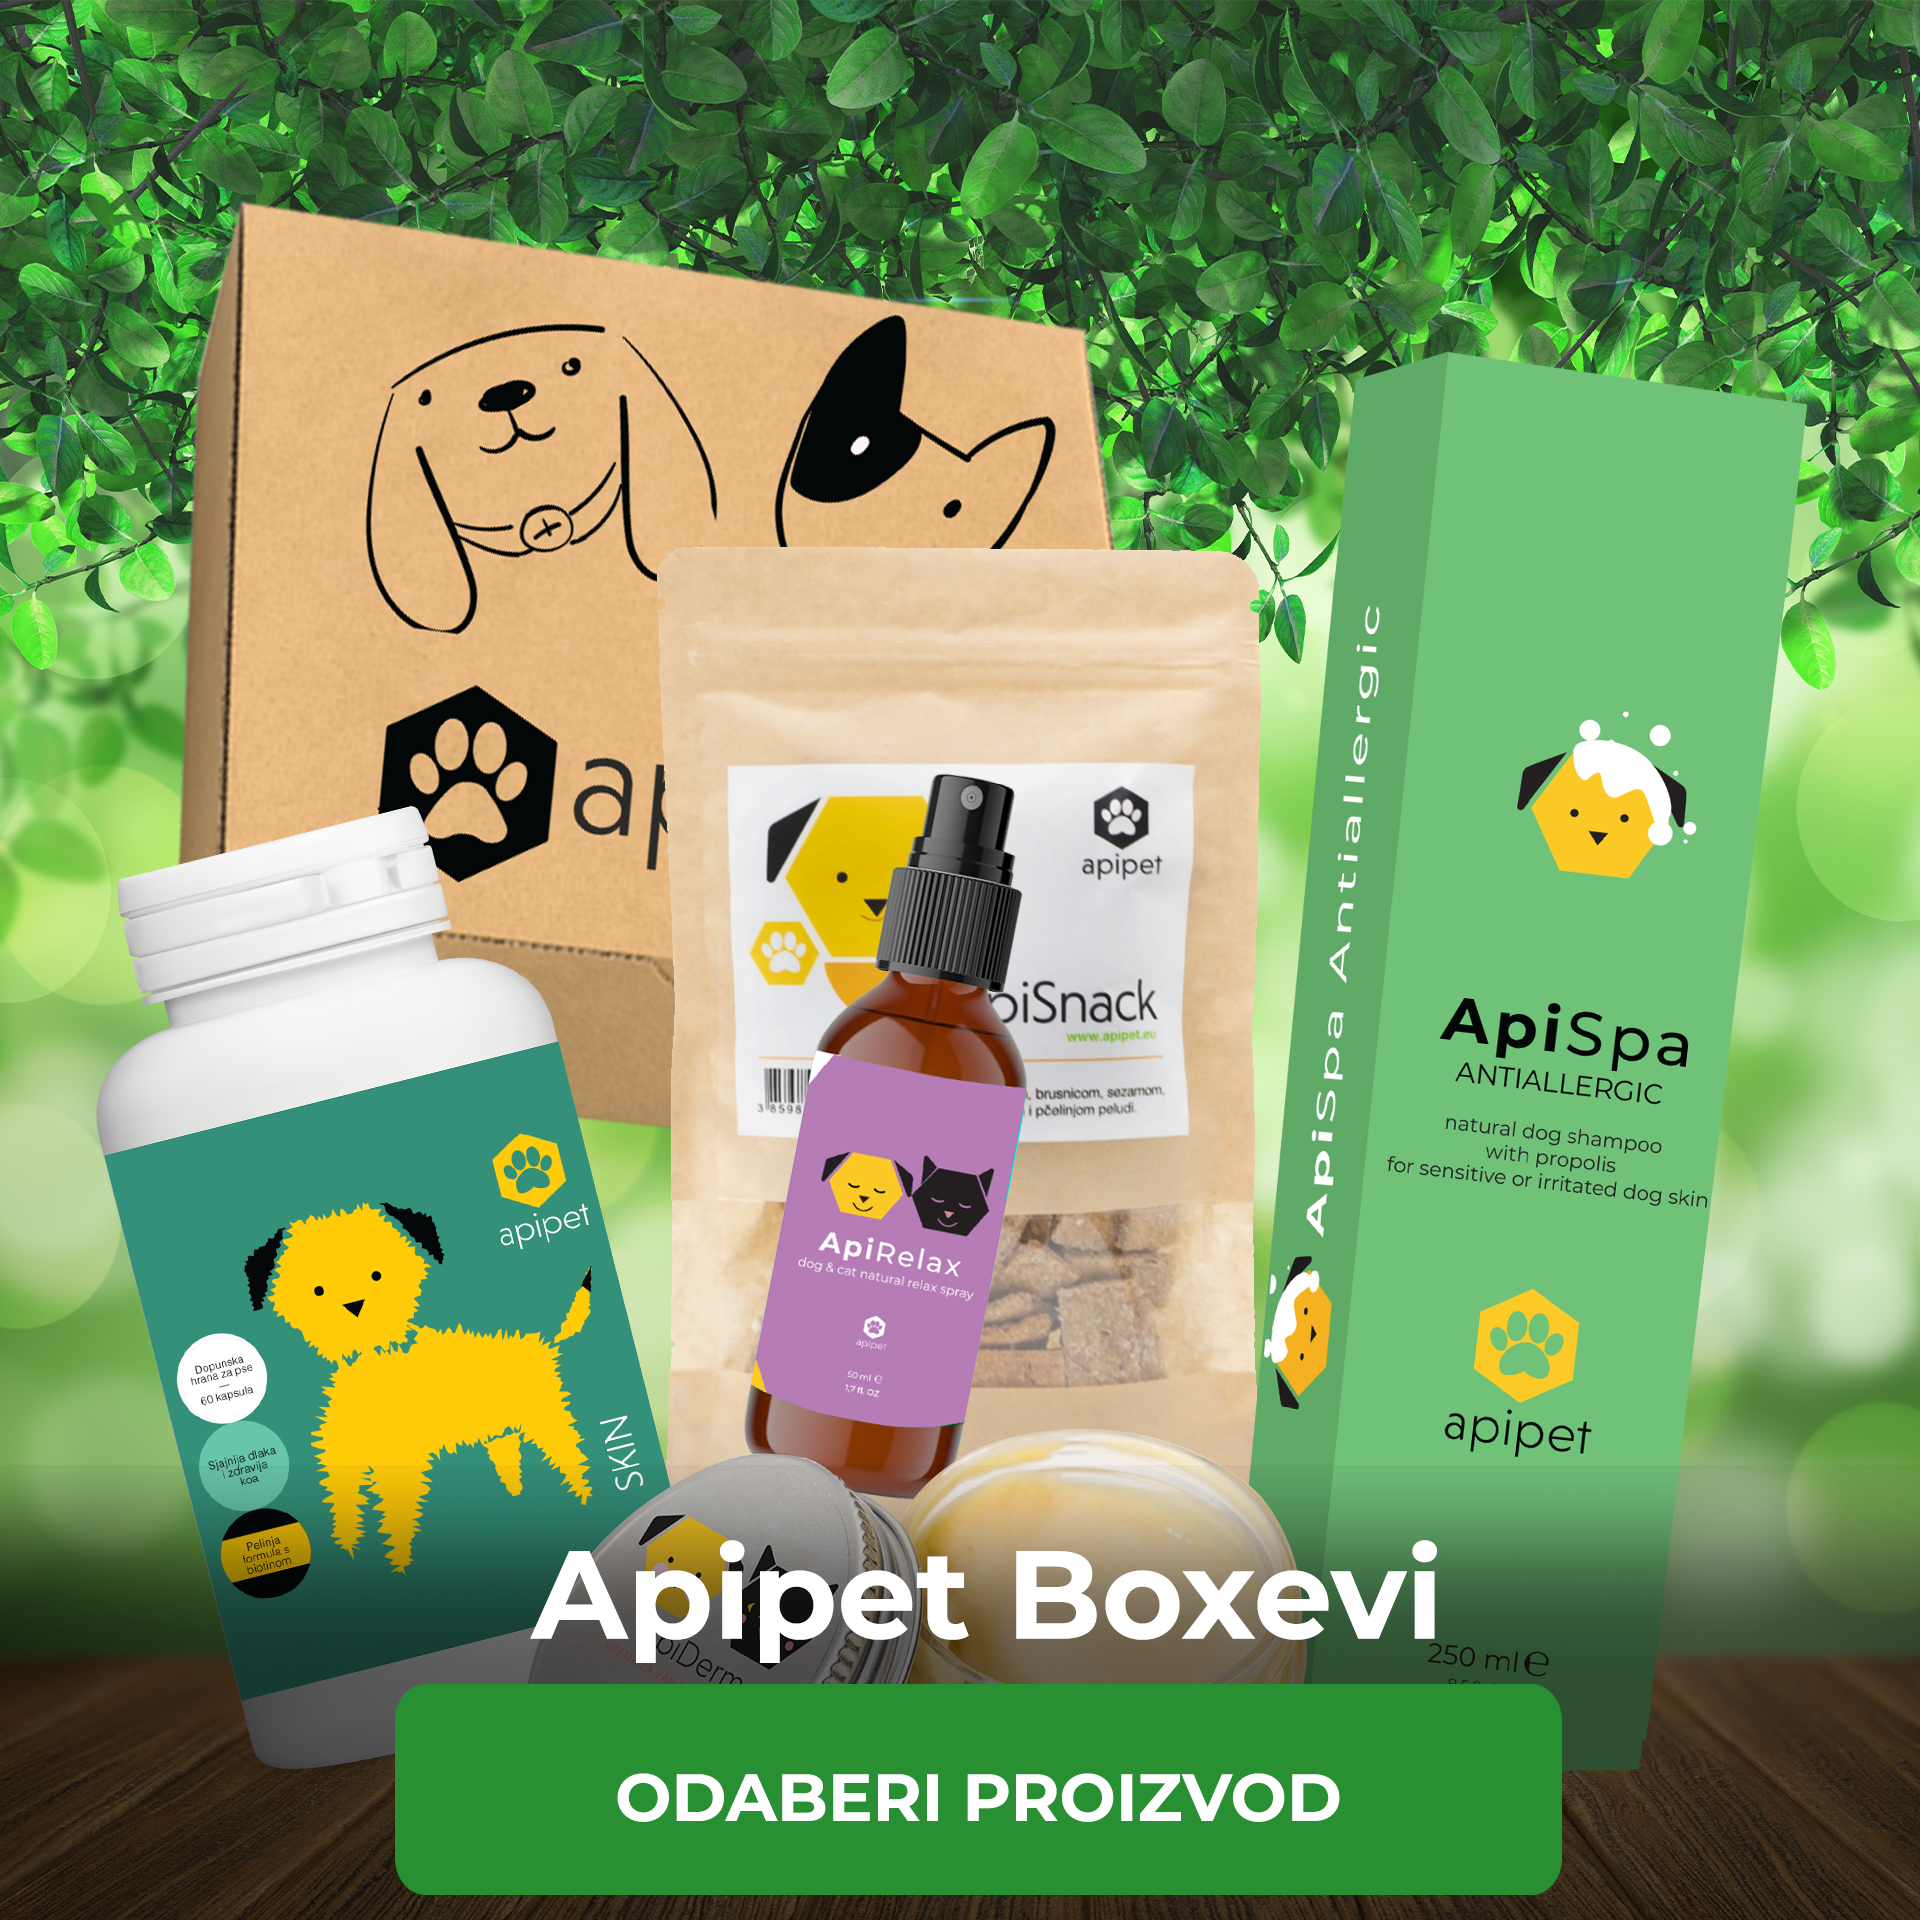 Apipet Boxevi